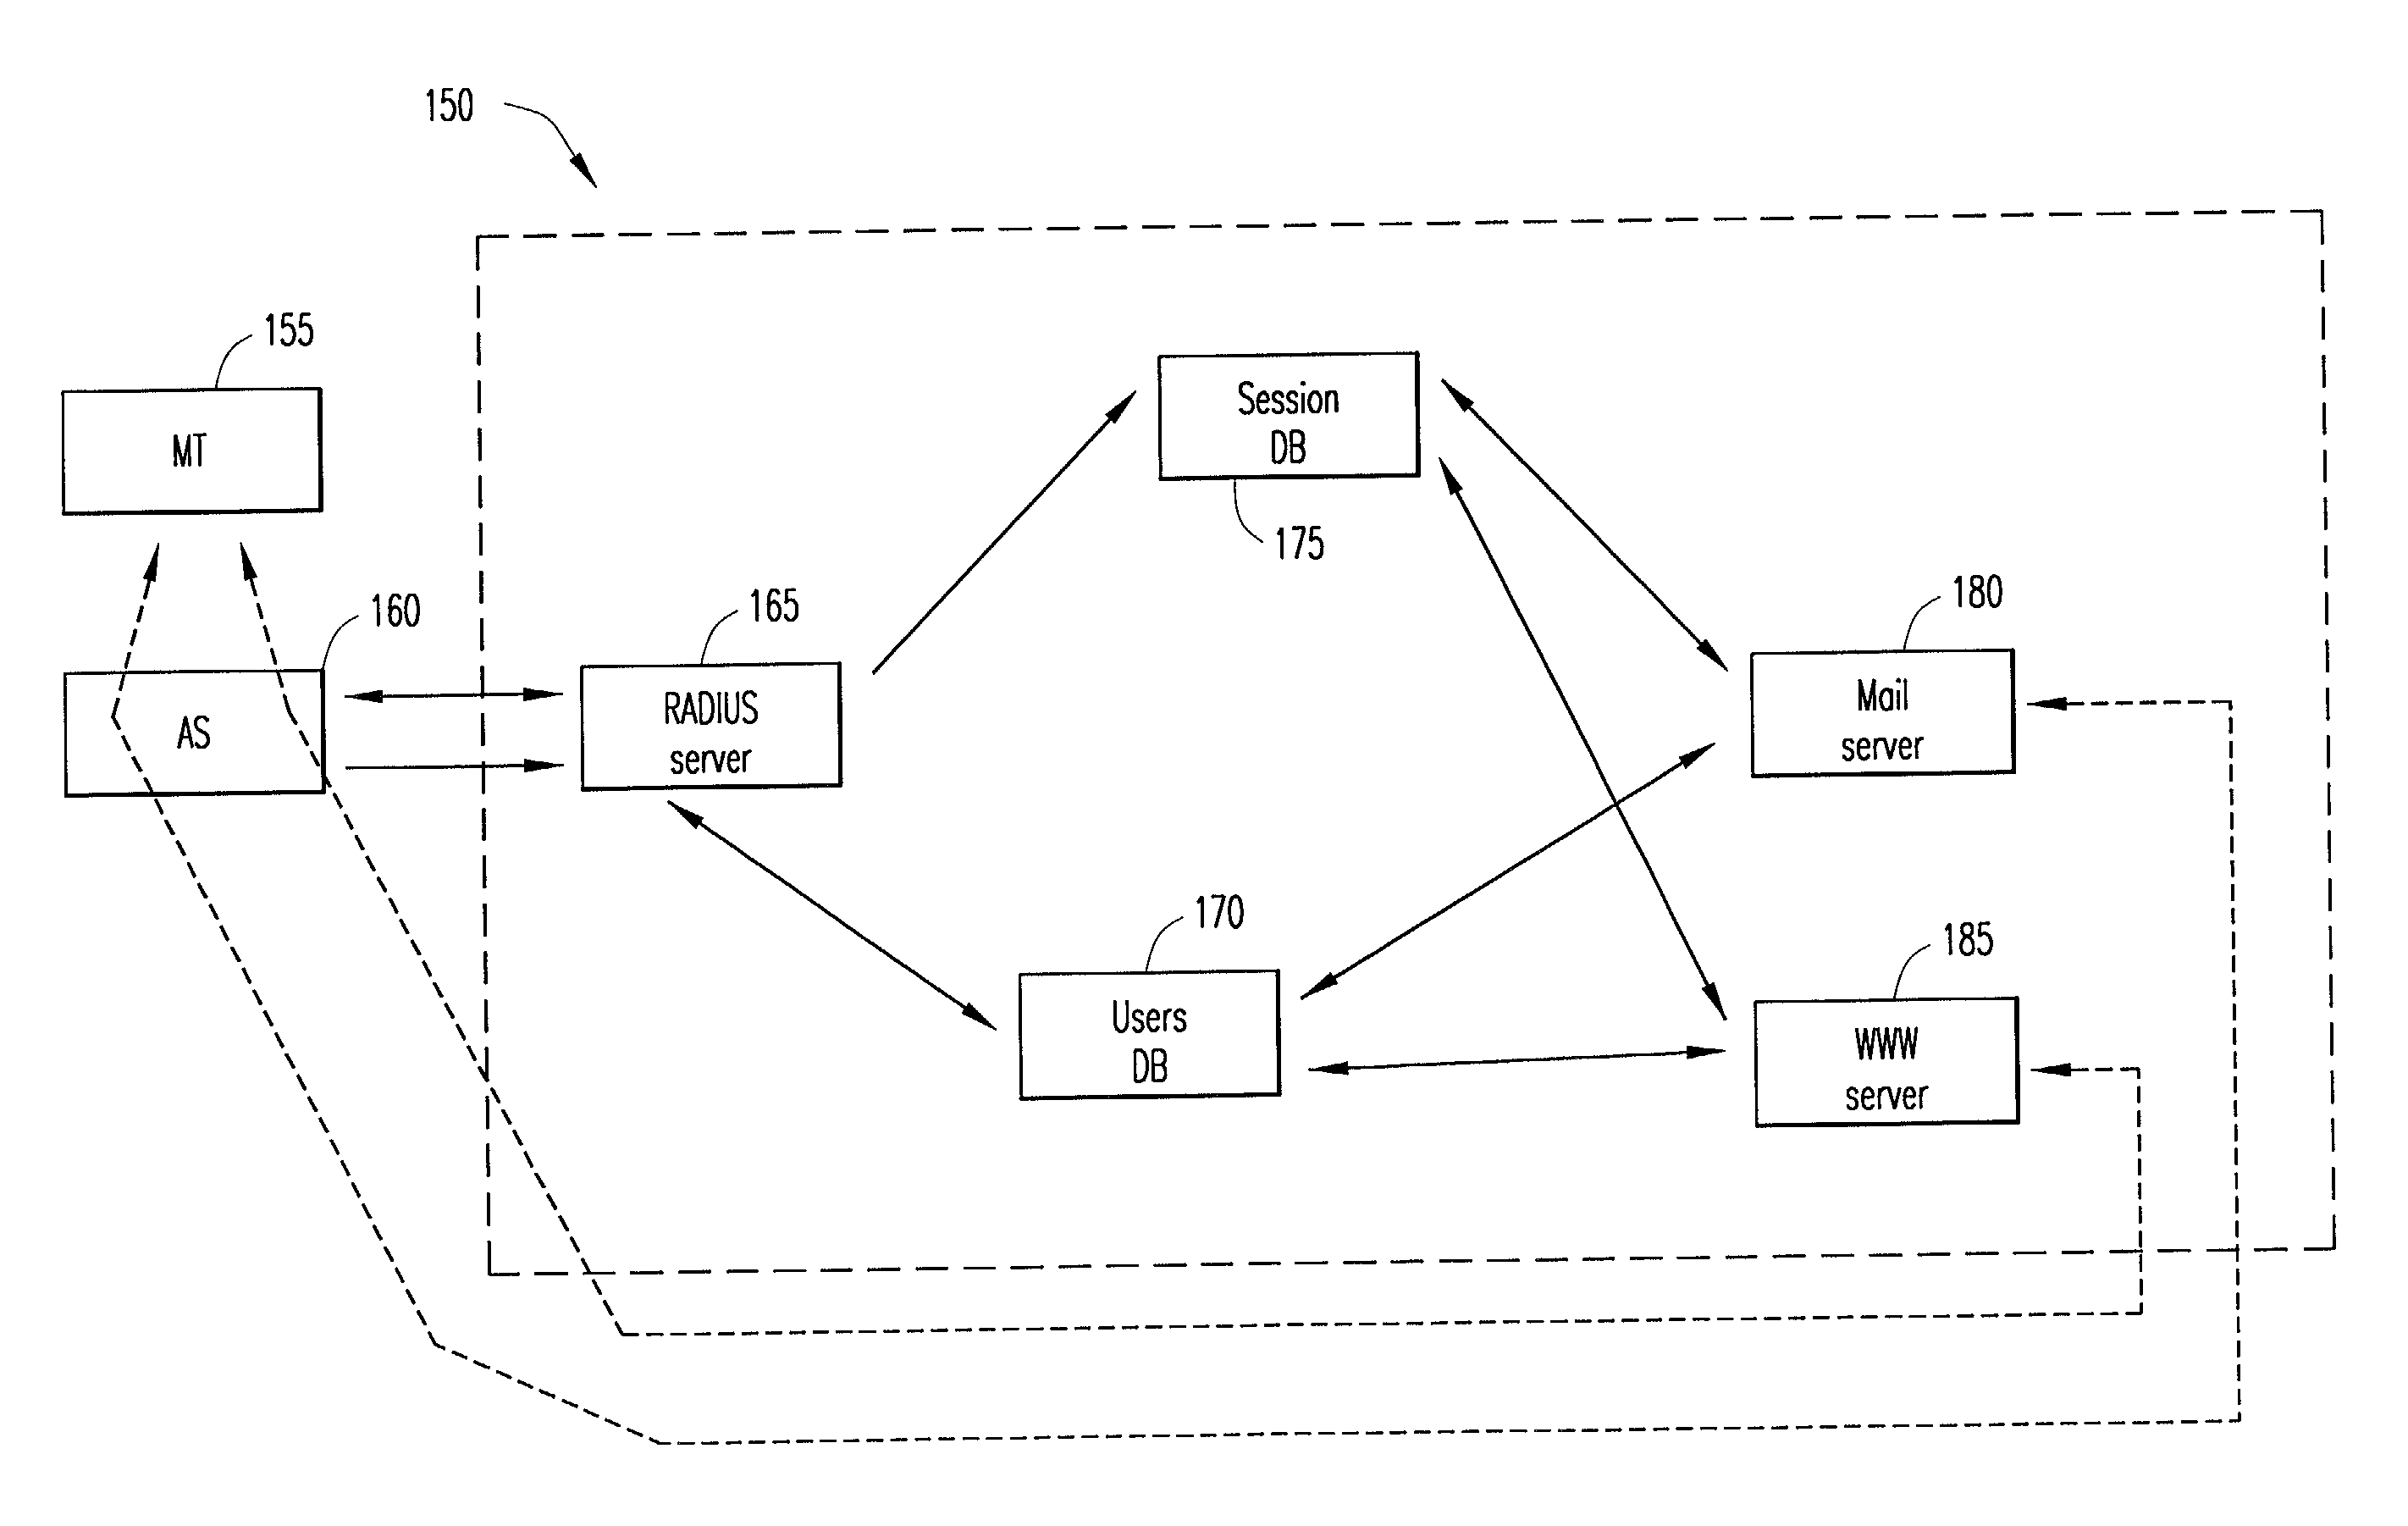 Method and apparatus for mapping an IP address to an MSISDN number within a service network